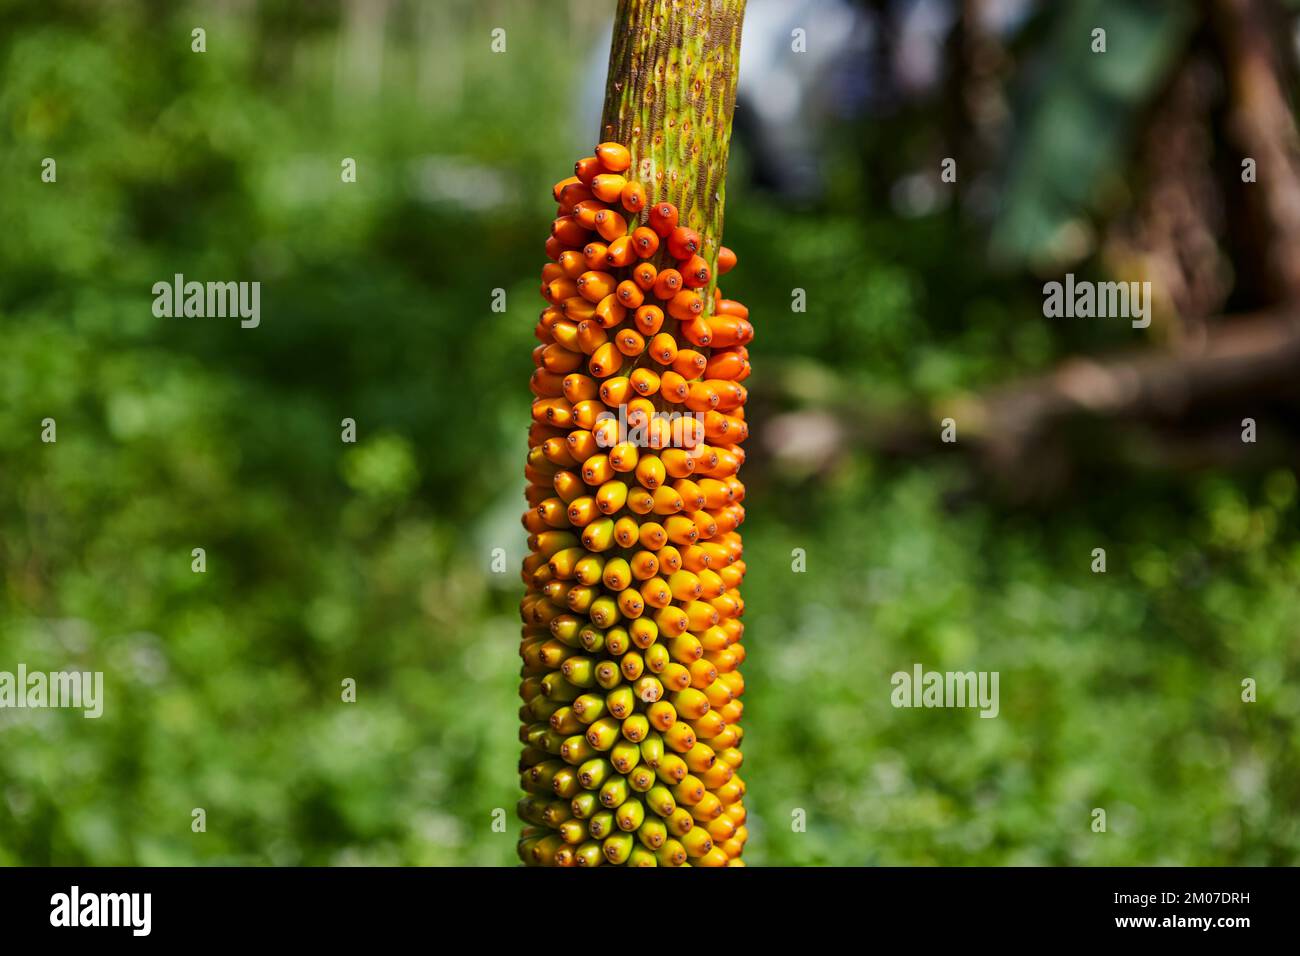 Close-up view of colorful Konjac fruit in the forest Stock Photo